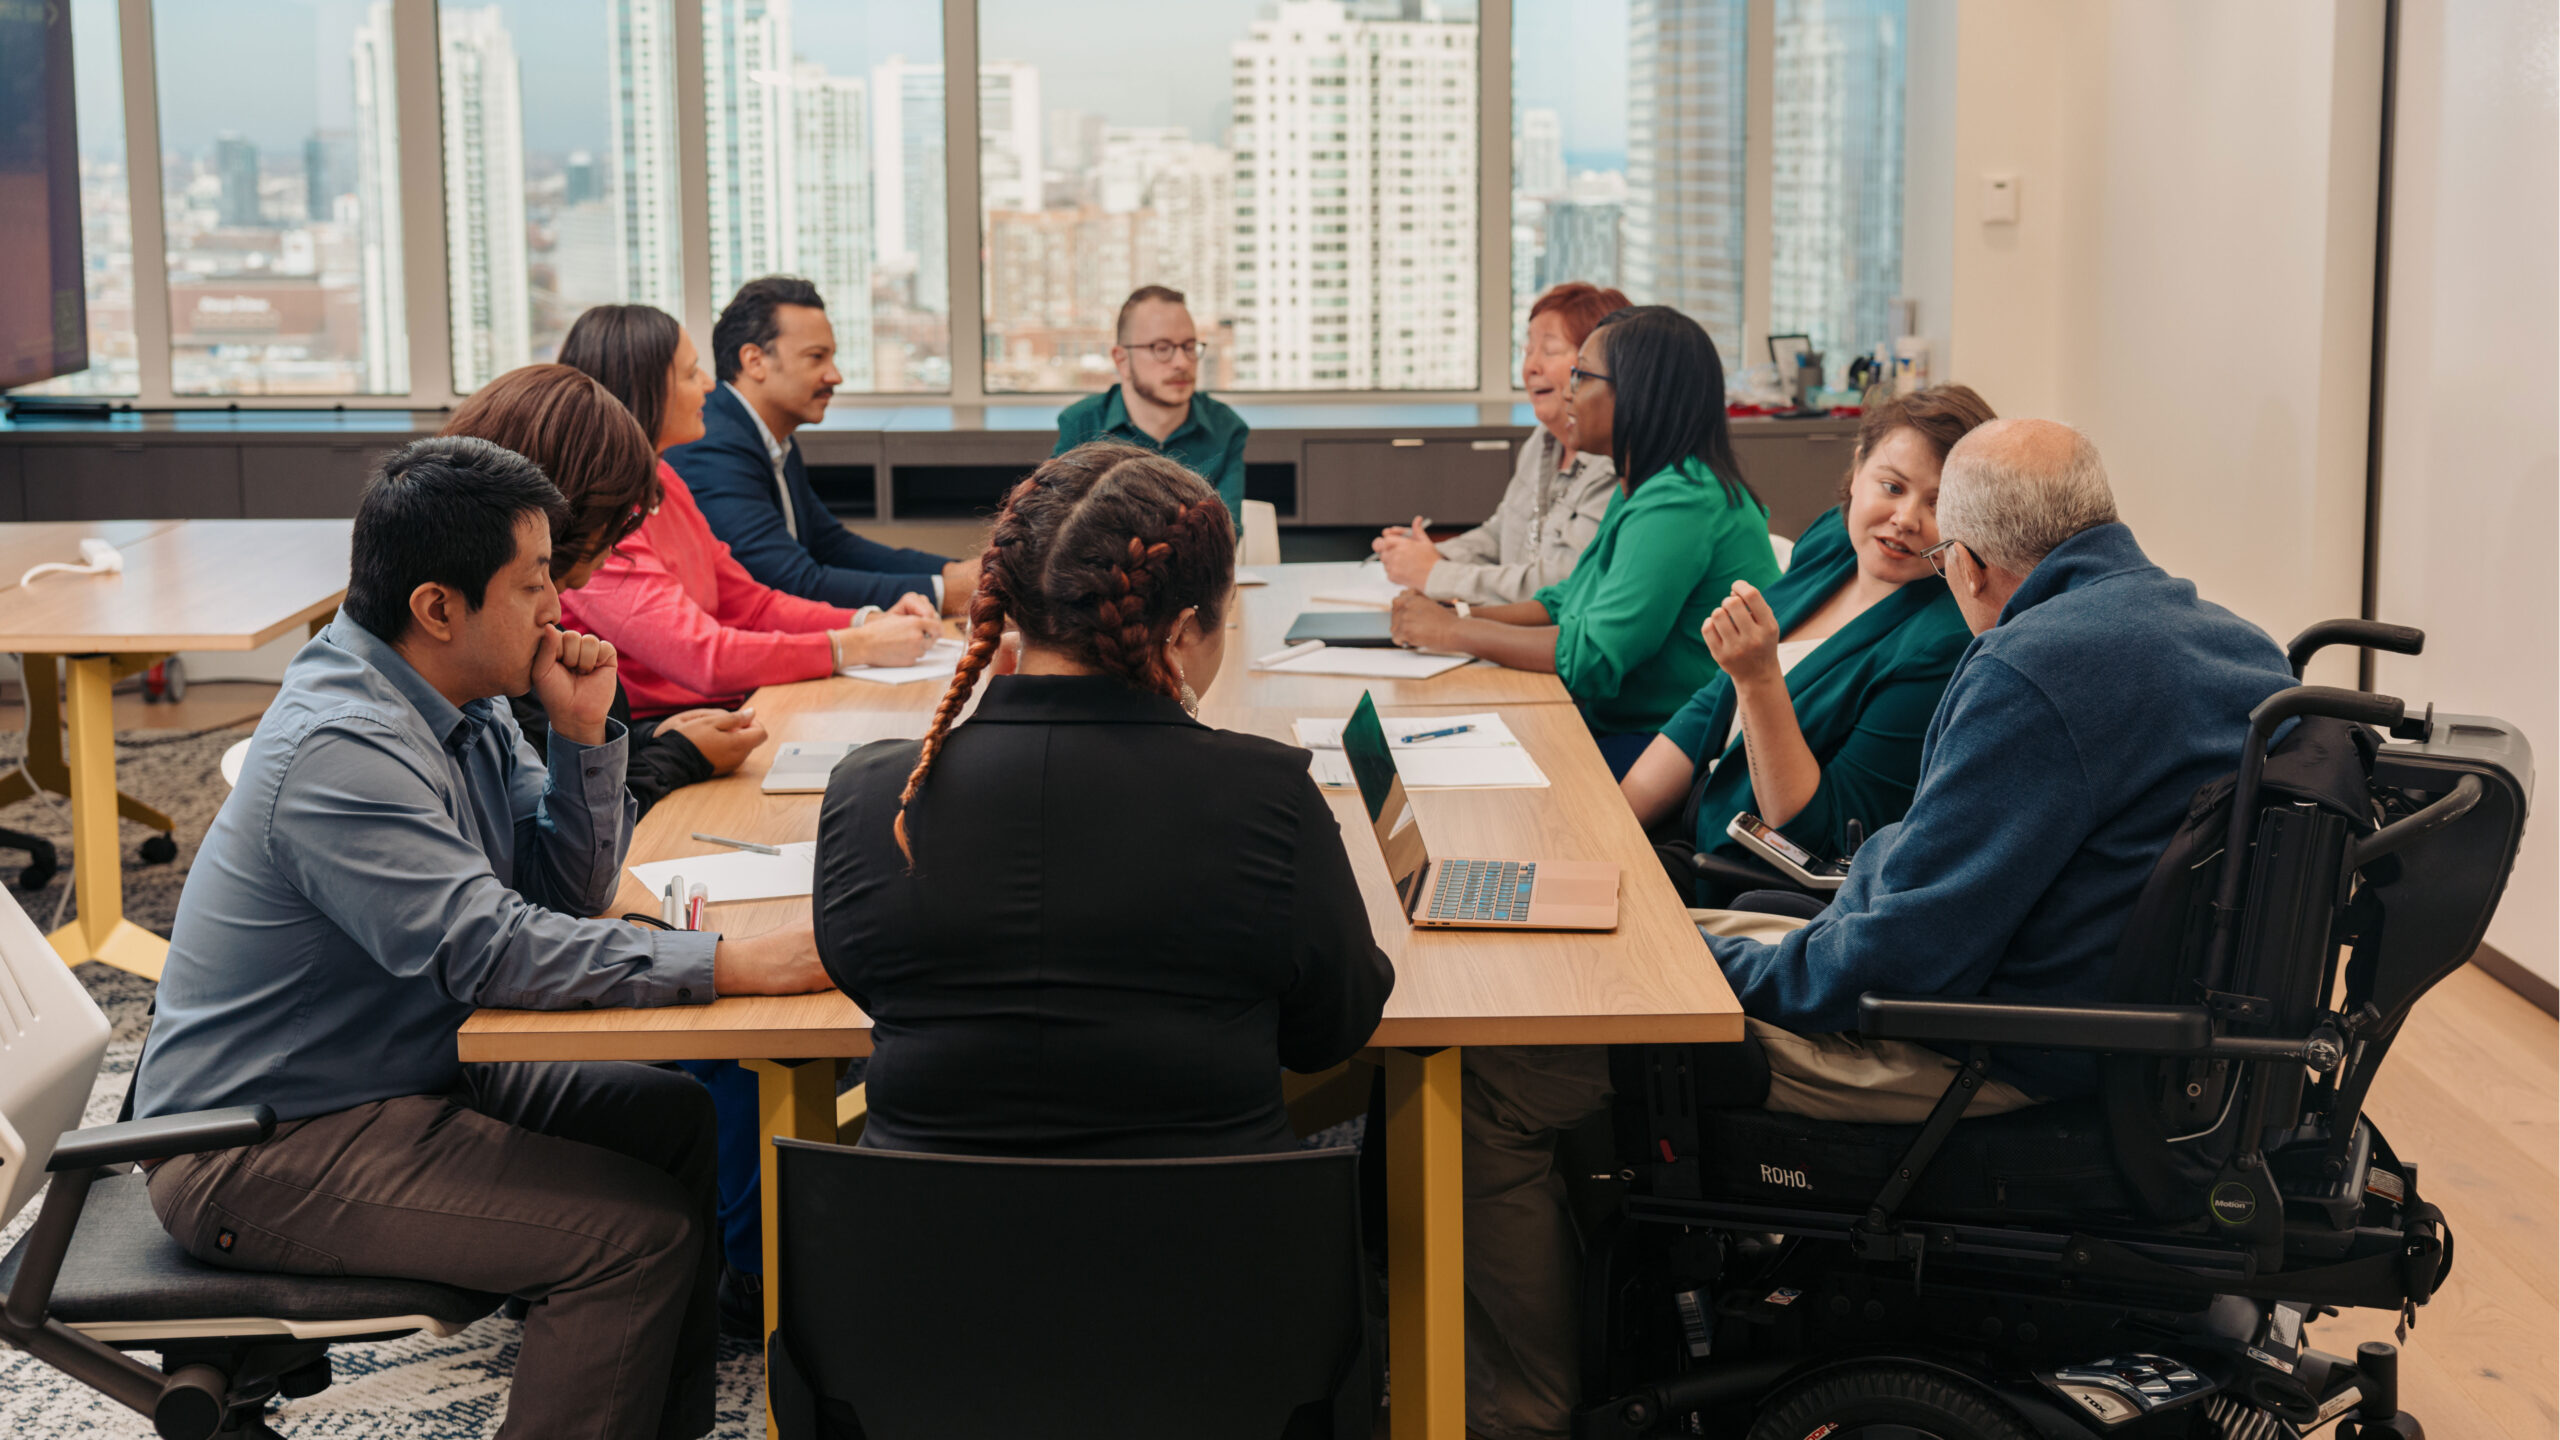 A group of diverse colleagues with disabilities gather around a conference table with the skyline showing in the background.